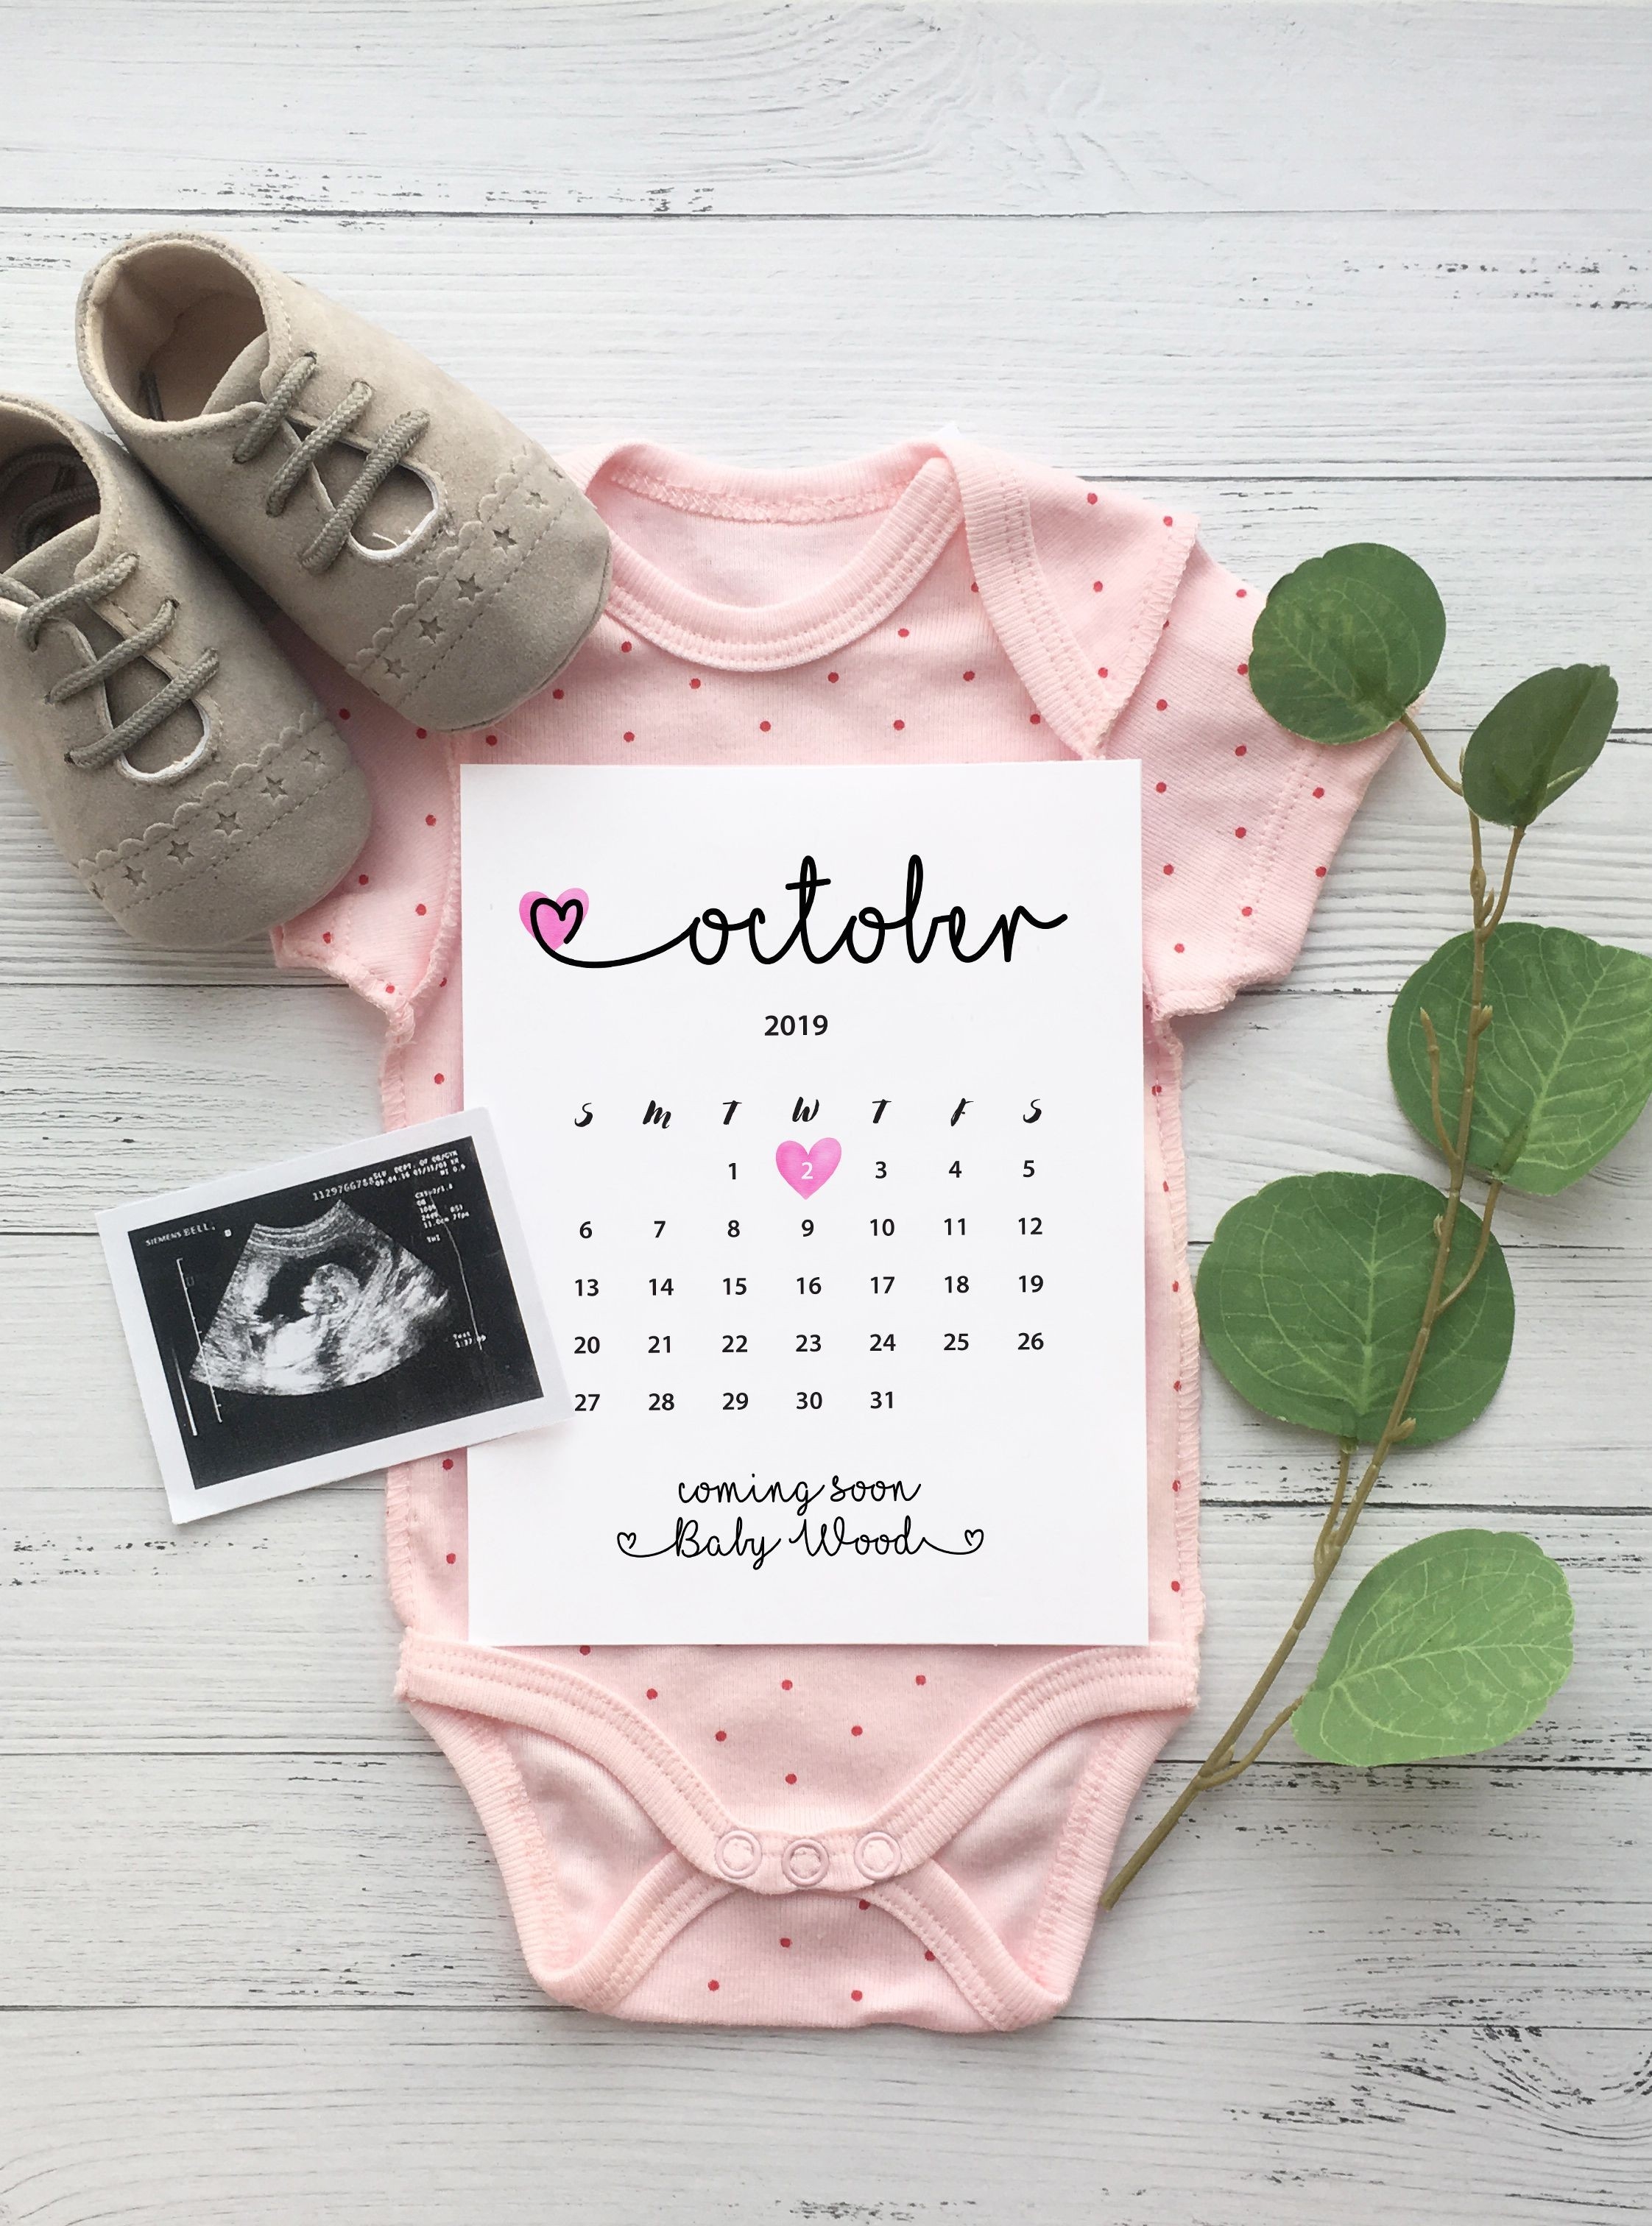 January 2020 Pregnancy Announcement, Baby Due Date Calendar-January 2020 Calendar Baby Announcement